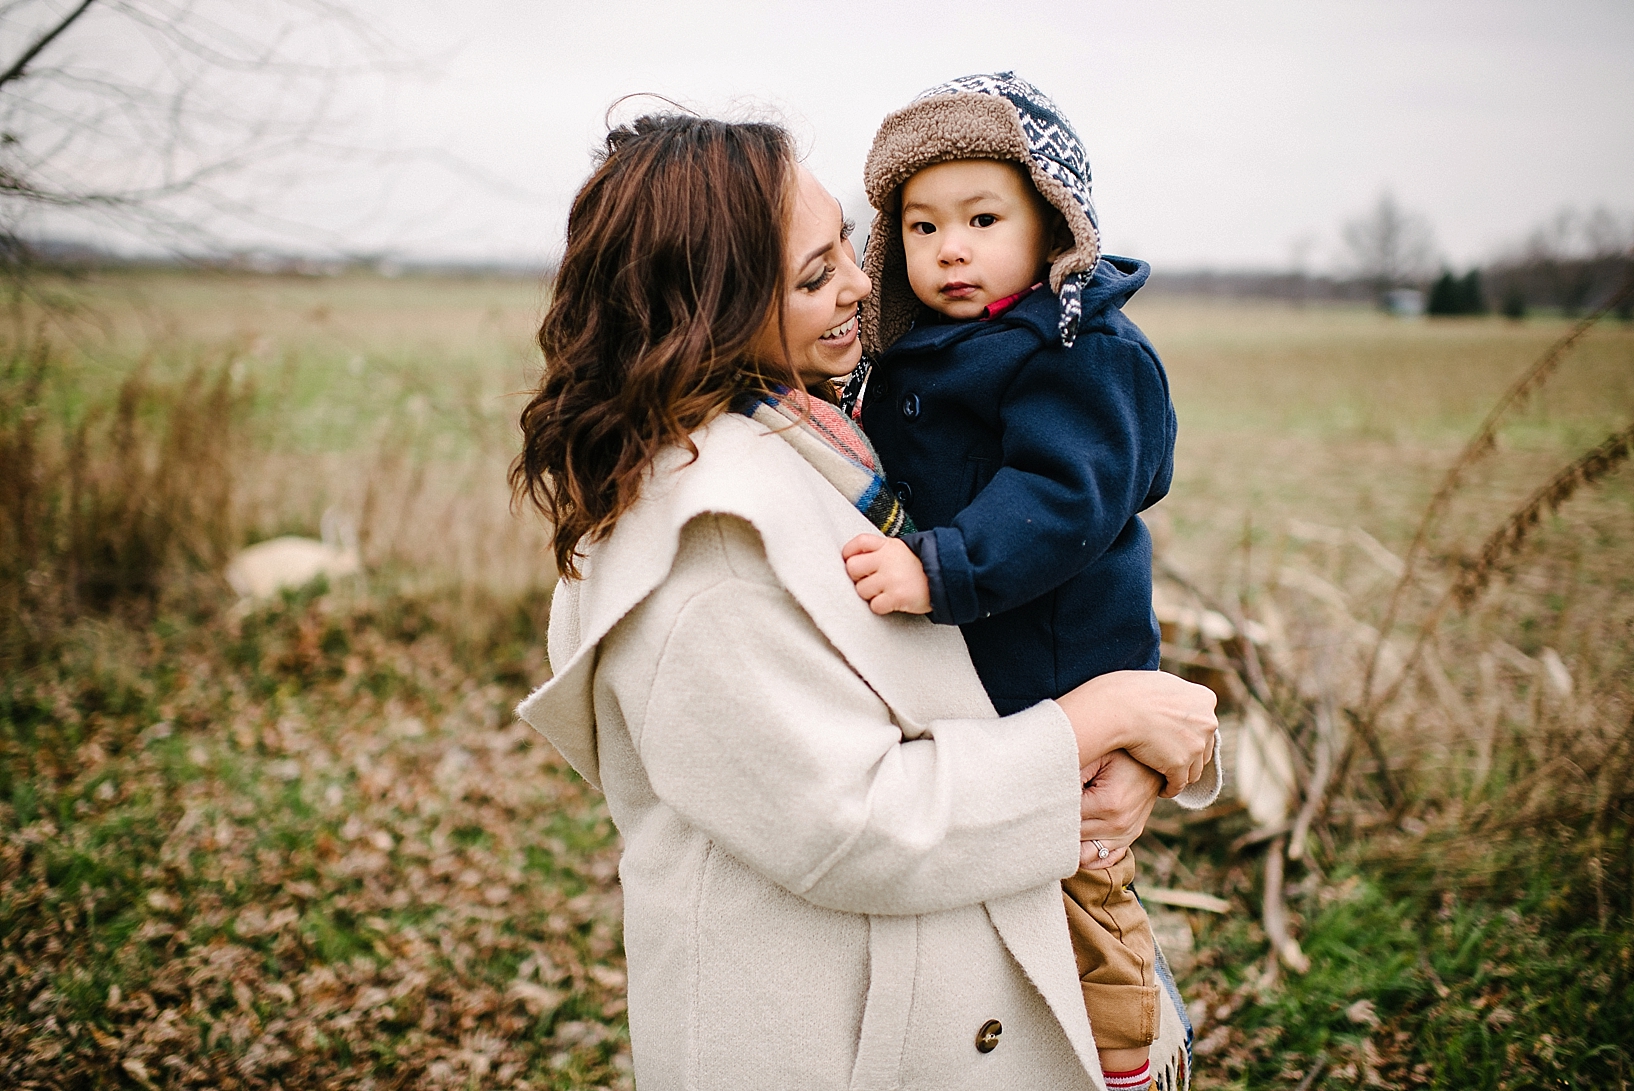 mom wearing white winter coat holding toddler son in her arms wearing navy pea coat and warm fuzzy hat